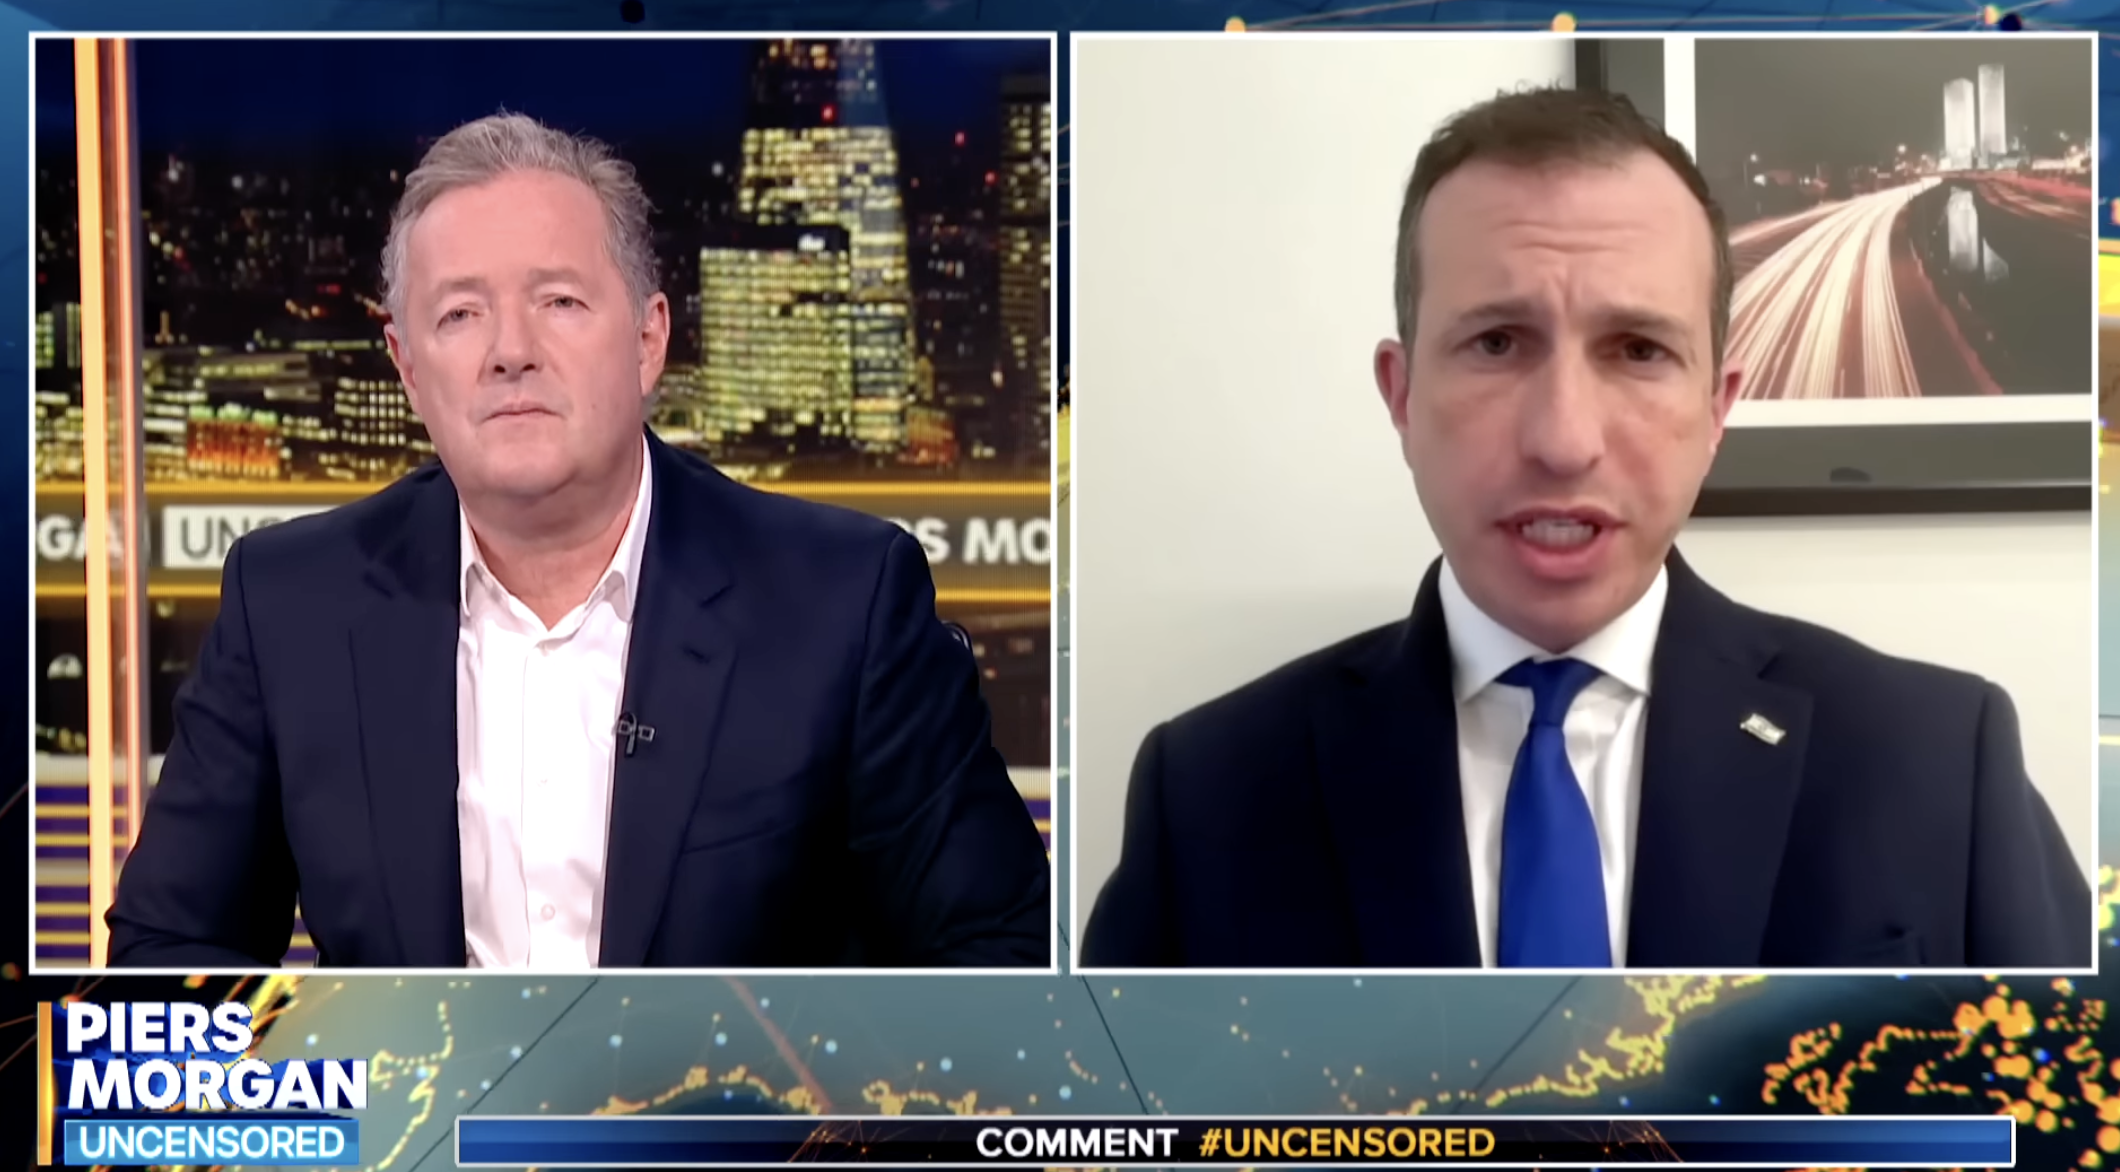 Piers Morgan confronts Israel official over refusal to give Gaza death toll